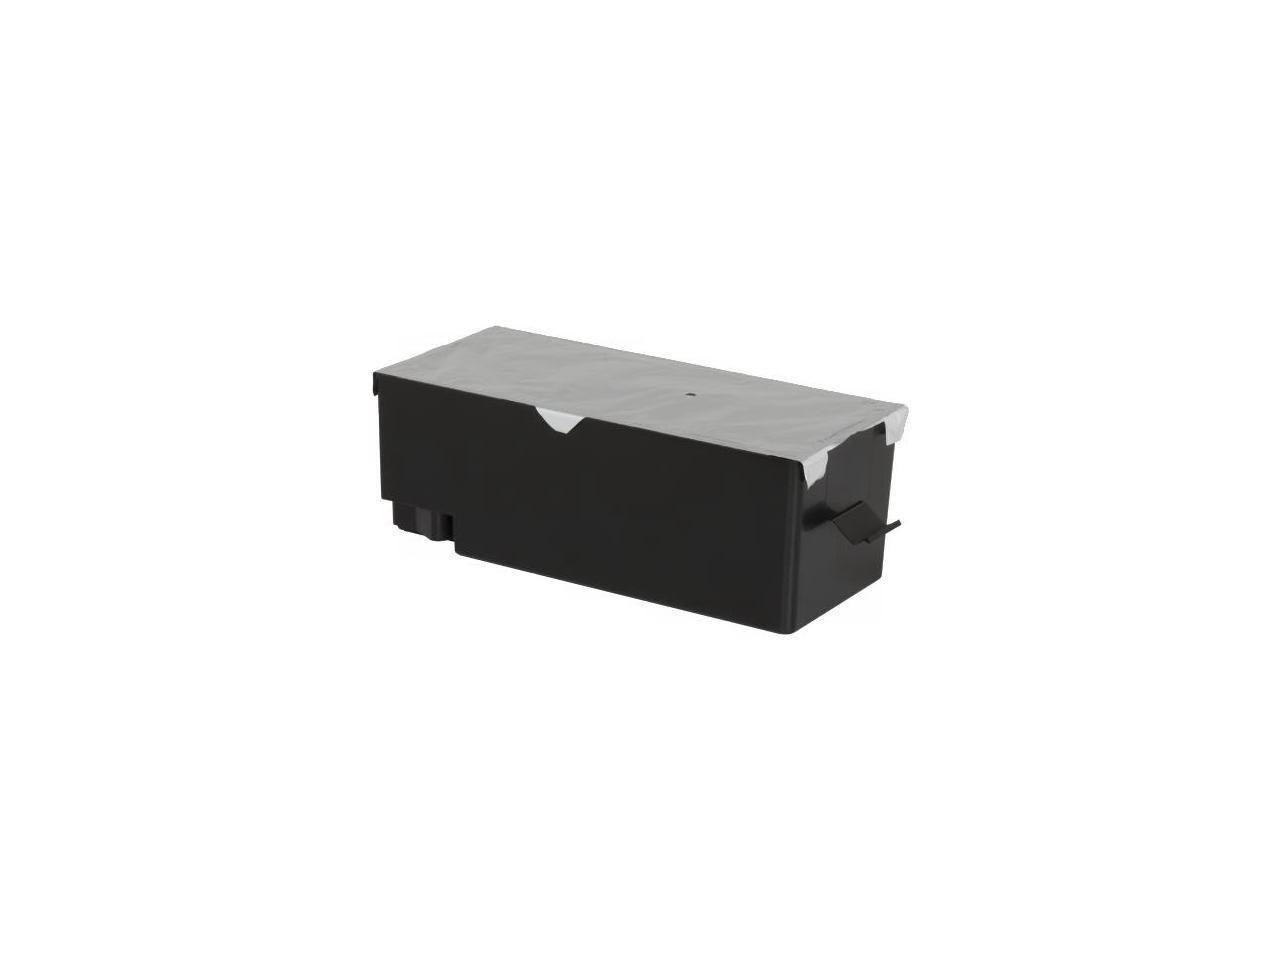 EPSON C33S020596 ACCESSORY MAINTENANCE BOX FOR TM-C7500 RESTRICTED TO COLORWORKS PARTNERS ONLY